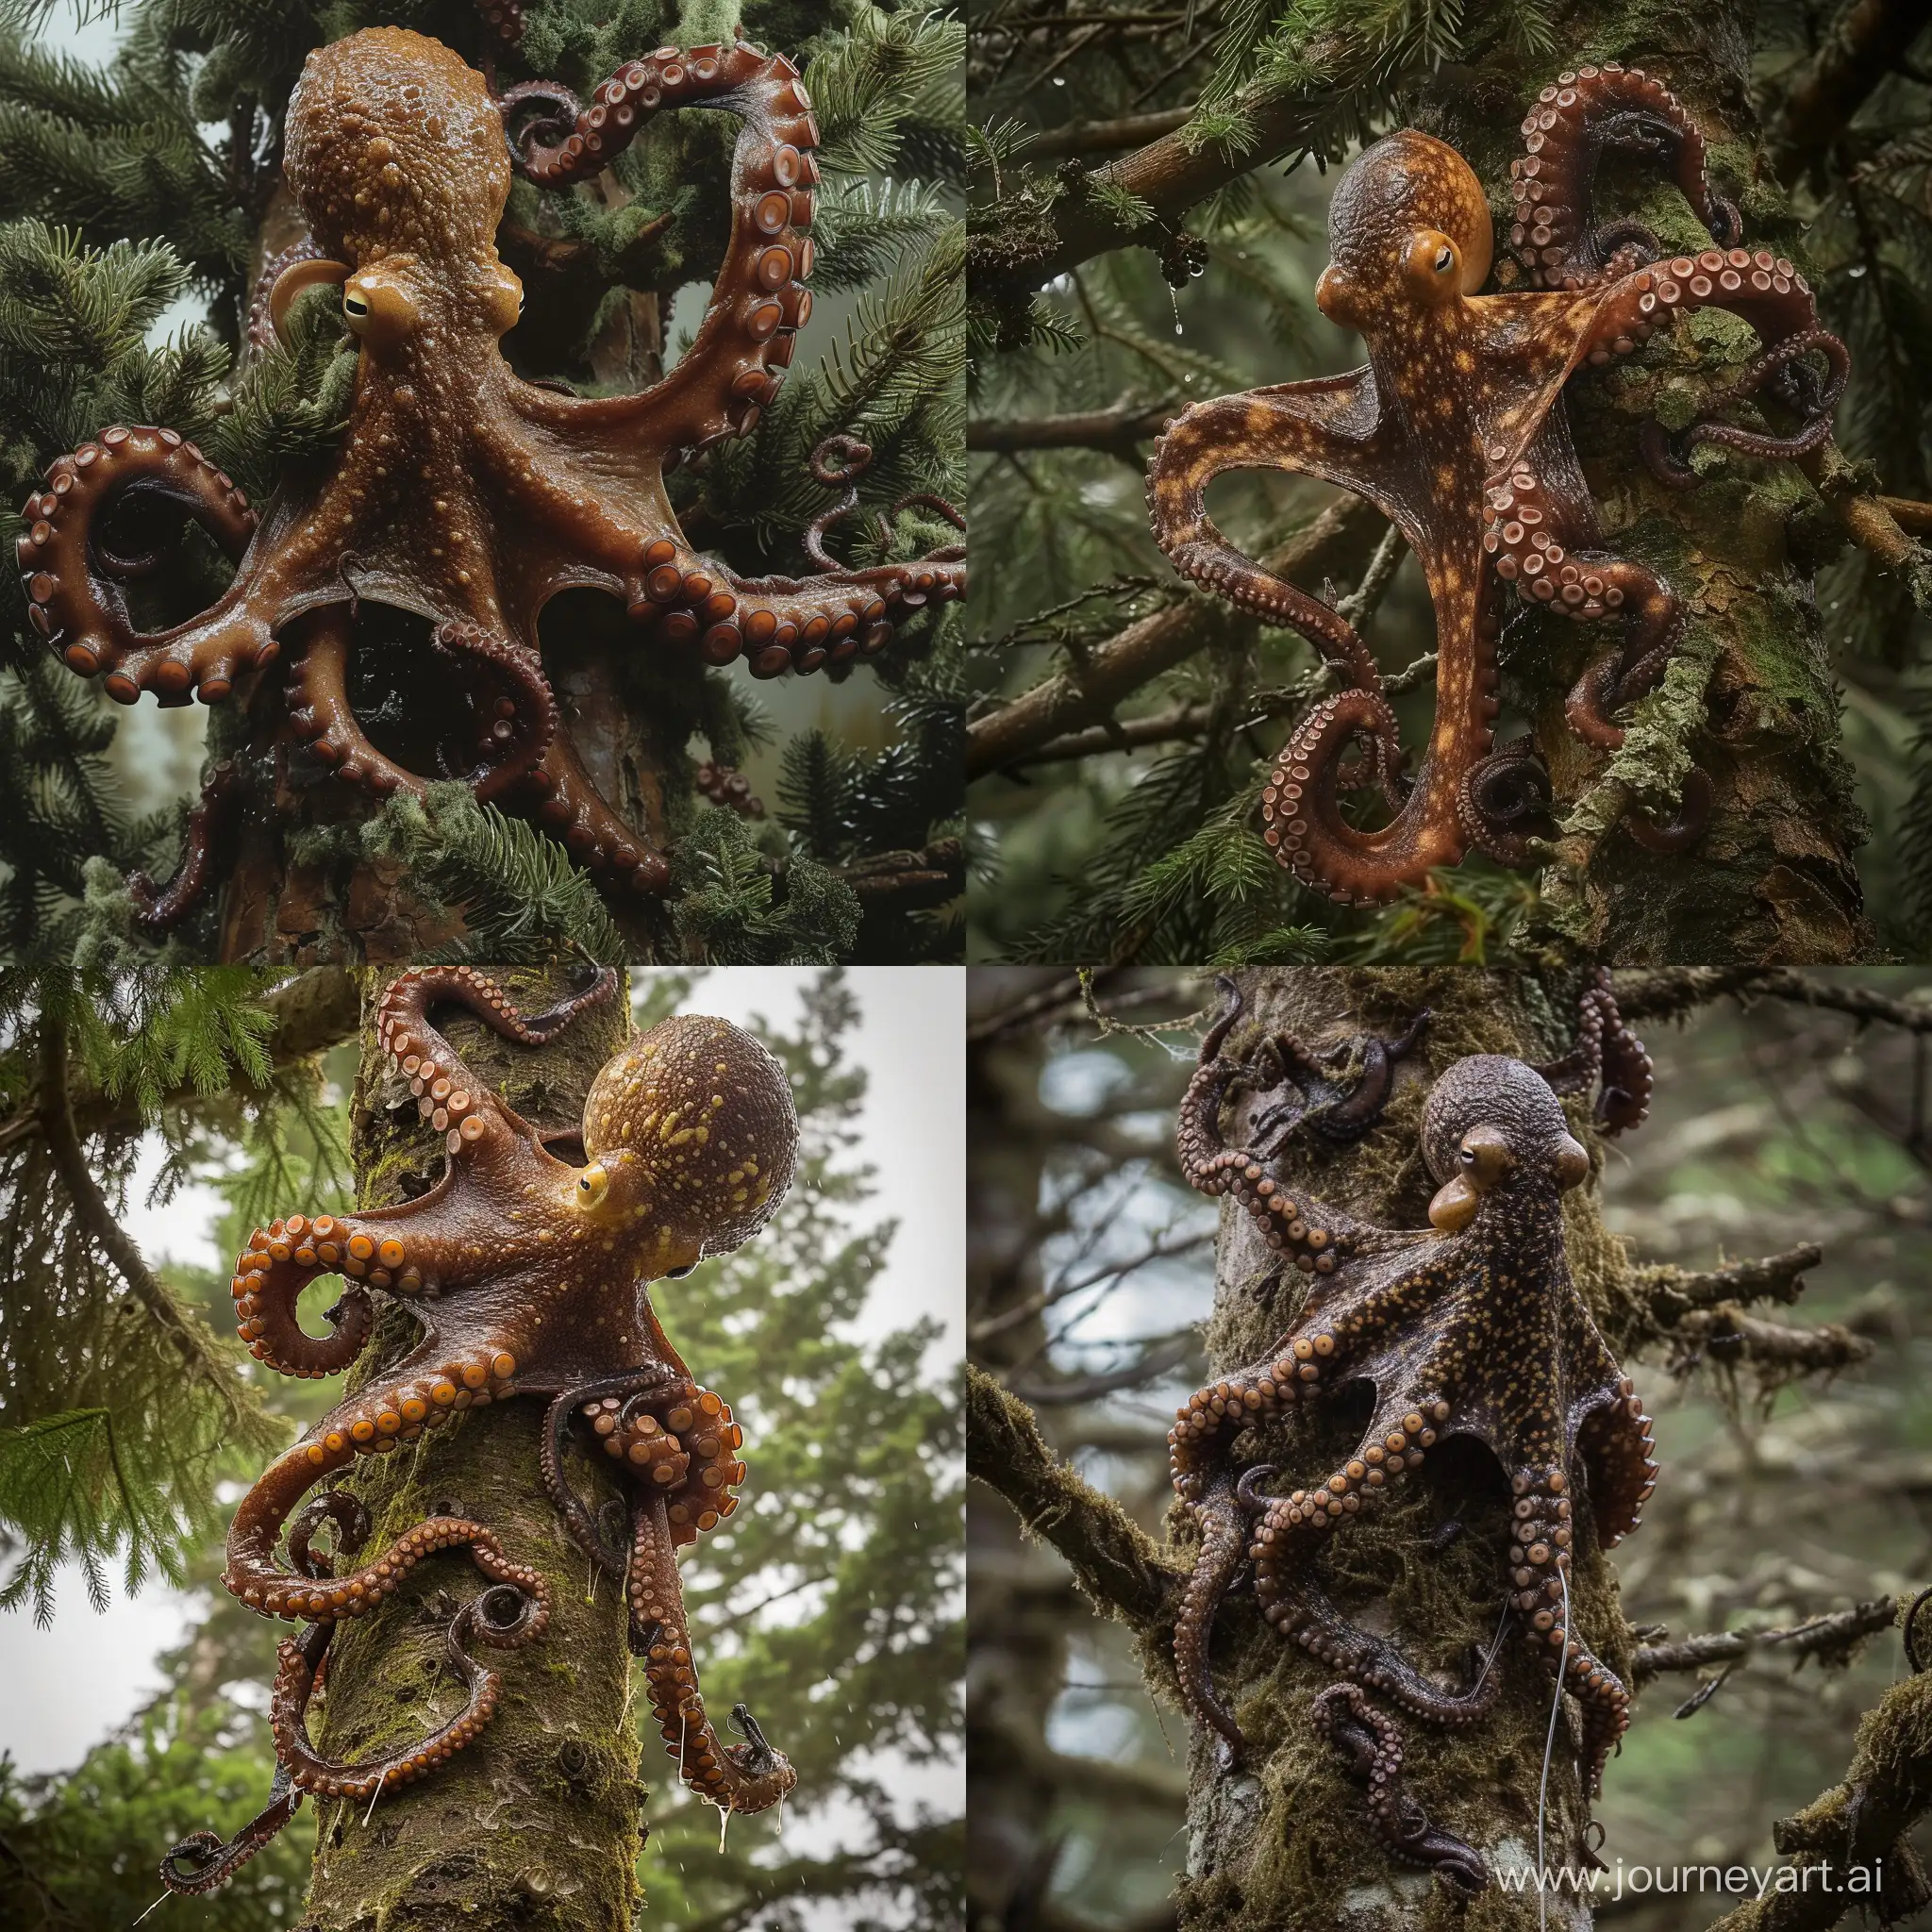 Remarkable-Octopus-Climbing-Pine-Tree-in-Enchanting-Rainforest